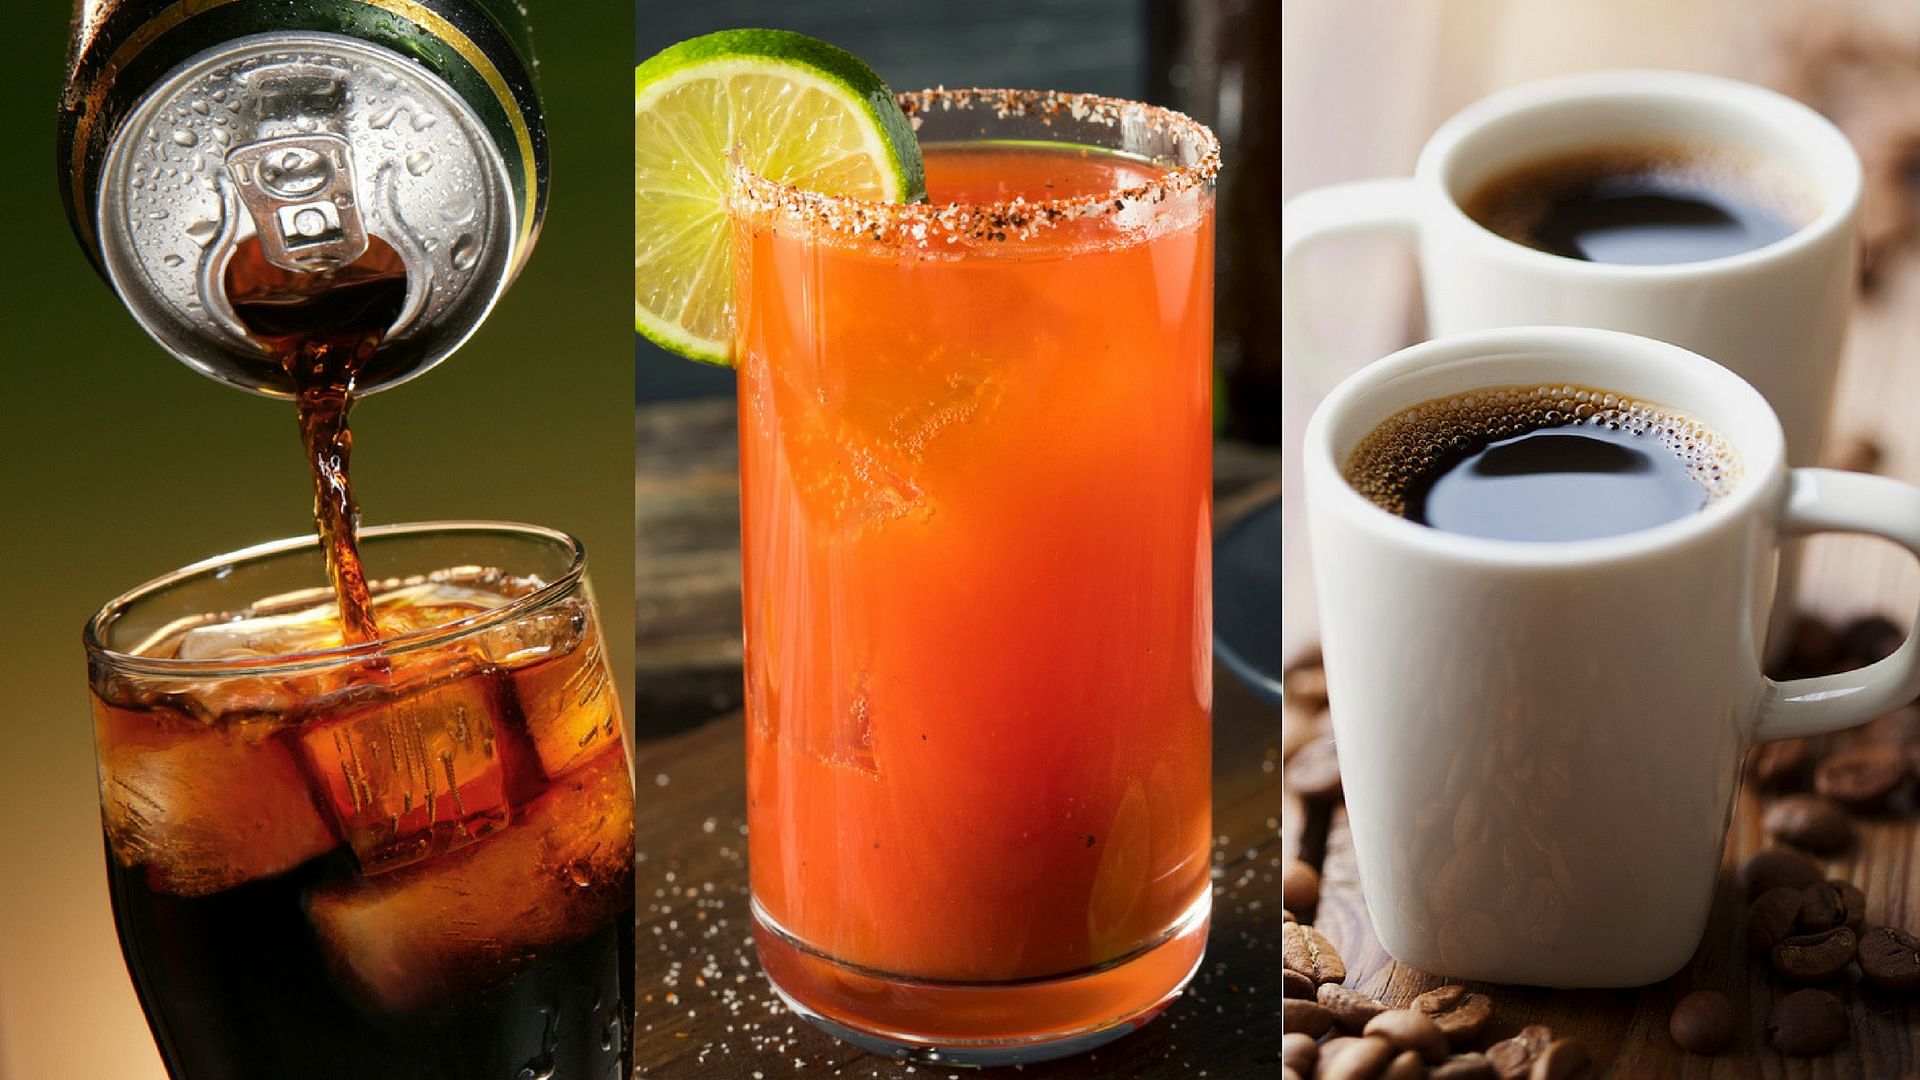 Aerated drinks, juices and coffee shouldn’t be the first thing you lay your hands on in the morning.&nbsp;